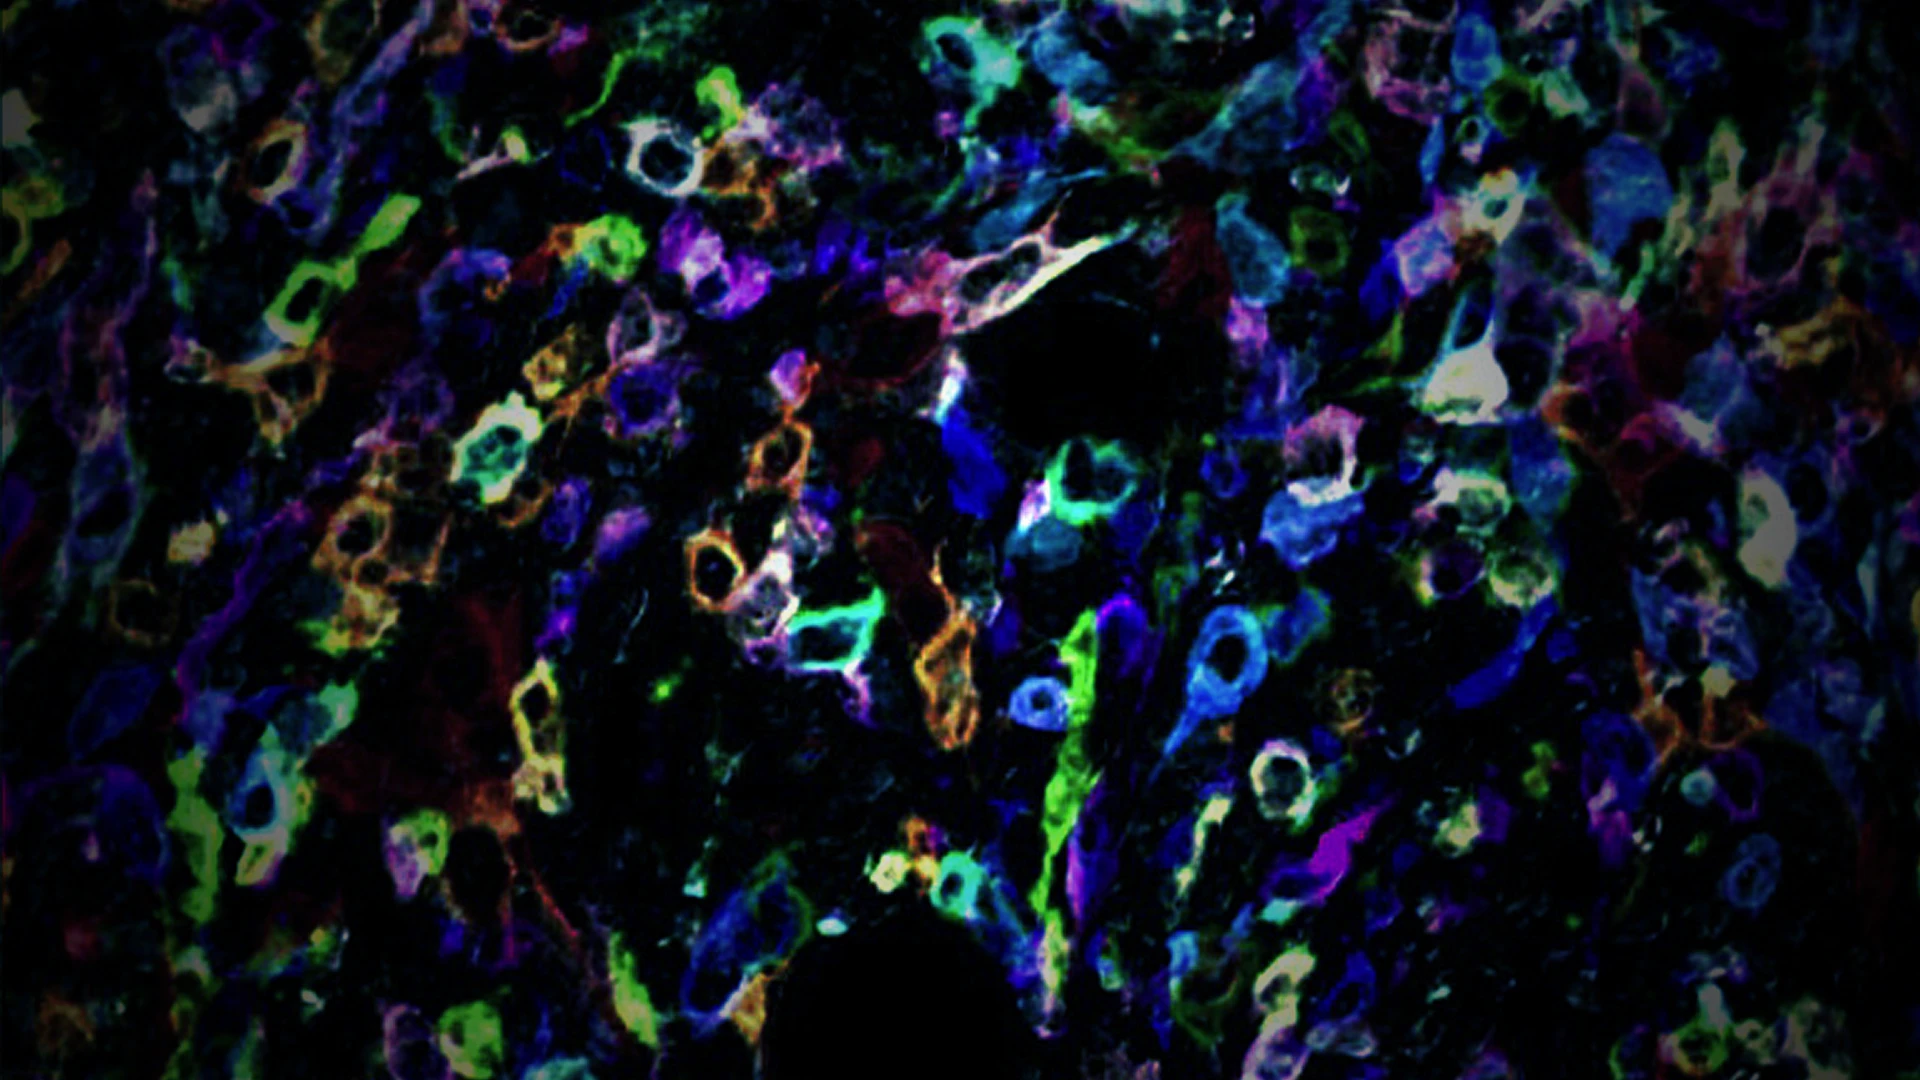 A Colorful New Approach to Identifying Regulators of the Tumor Microenvironment